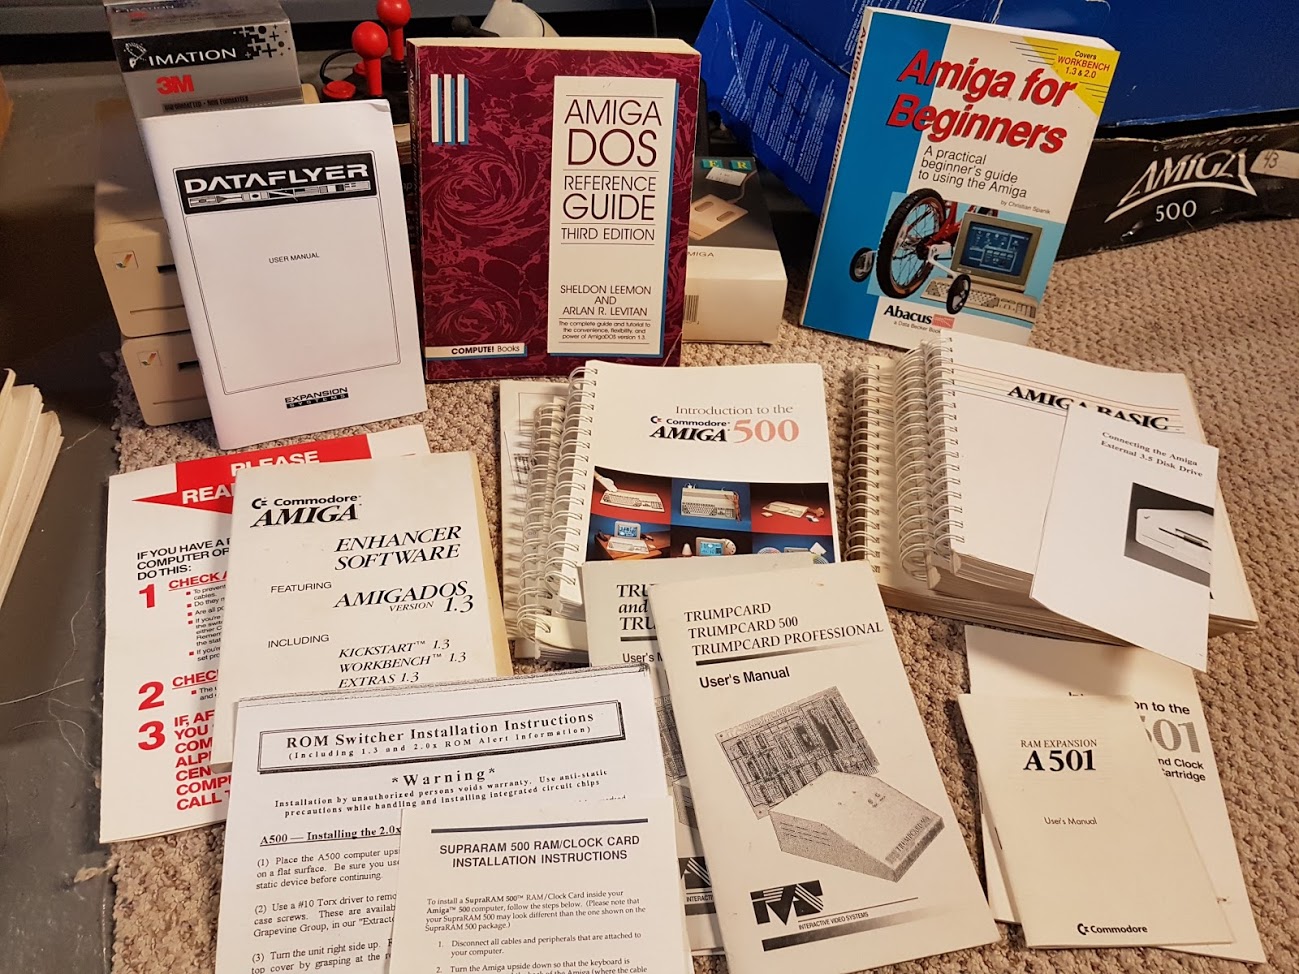 Even more manuals - "there are more Amiga manuals than there are computers."